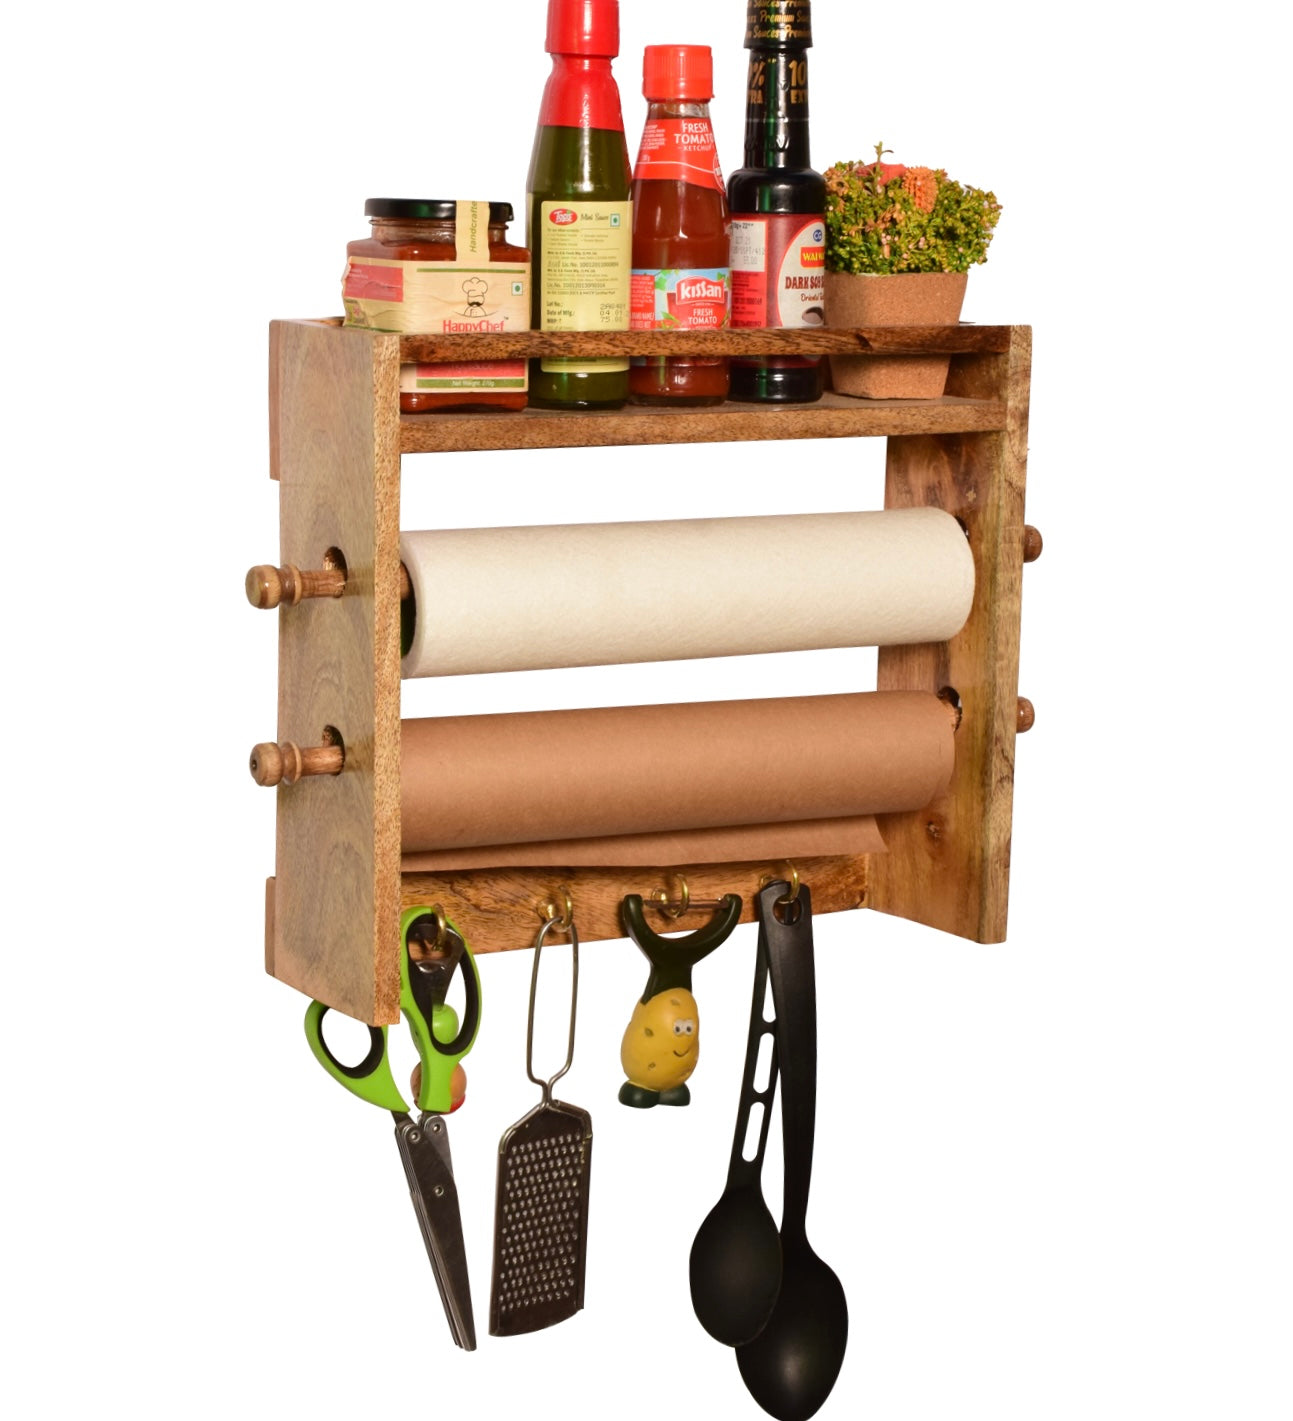 The Weaver's Nest Solid Wood Double Roll Paper Towel Holder / Tissue Paper Stand / Roll Dispenser with Spice Rack Shelf and Hooks for Kitchen